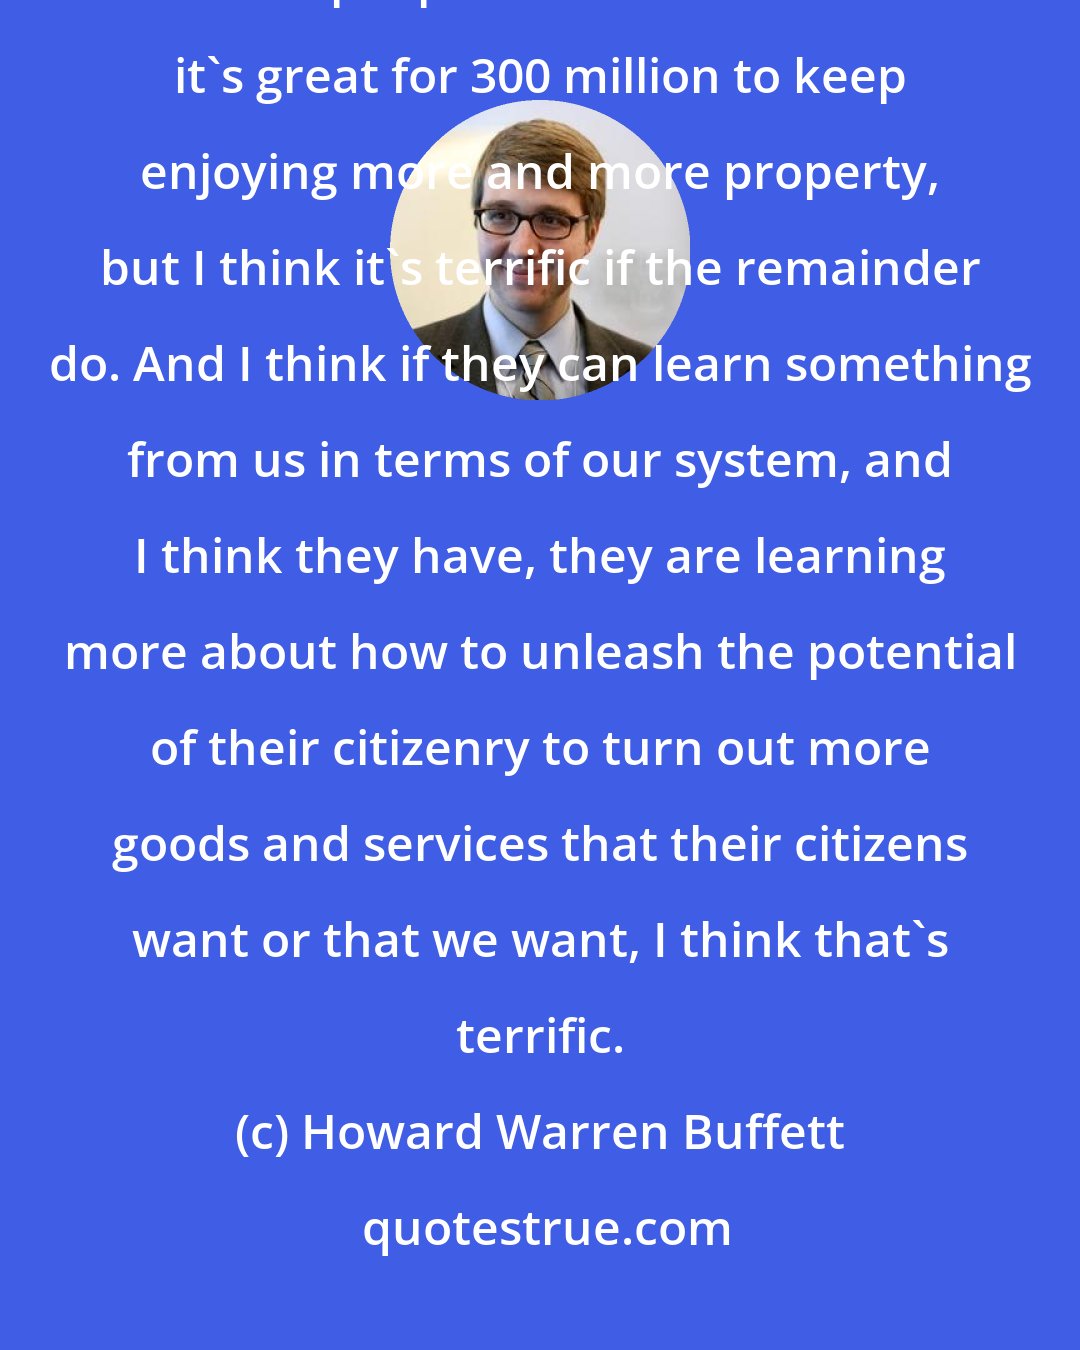 Howard Warren Buffett: It will be good for us in the long run, and I mean there are six and a half billion people in this world. And it's great for 300 million to keep enjoying more and more property, but I think it's terrific if the remainder do. And I think if they can learn something from us in terms of our system, and I think they have, they are learning more about how to unleash the potential of their citizenry to turn out more goods and services that their citizens want or that we want, I think that's terrific.